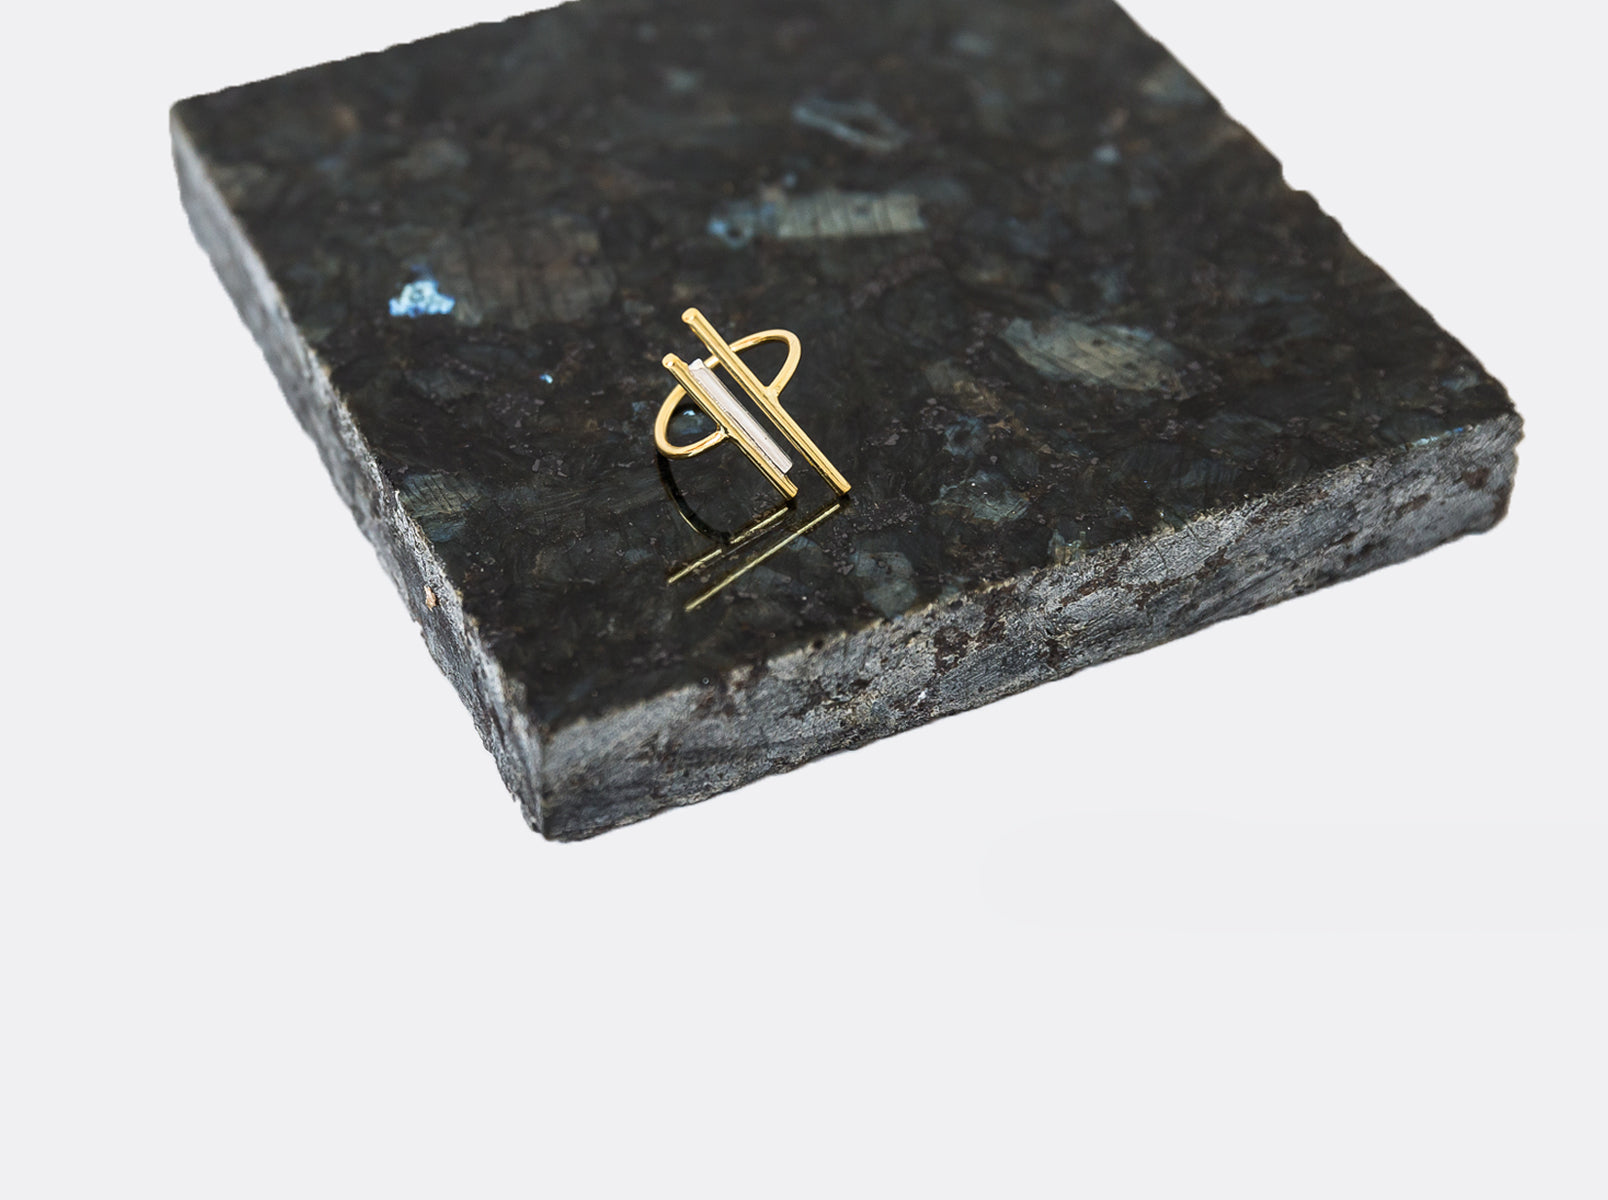 A two toned gold and silver ring sits on a granite platform.